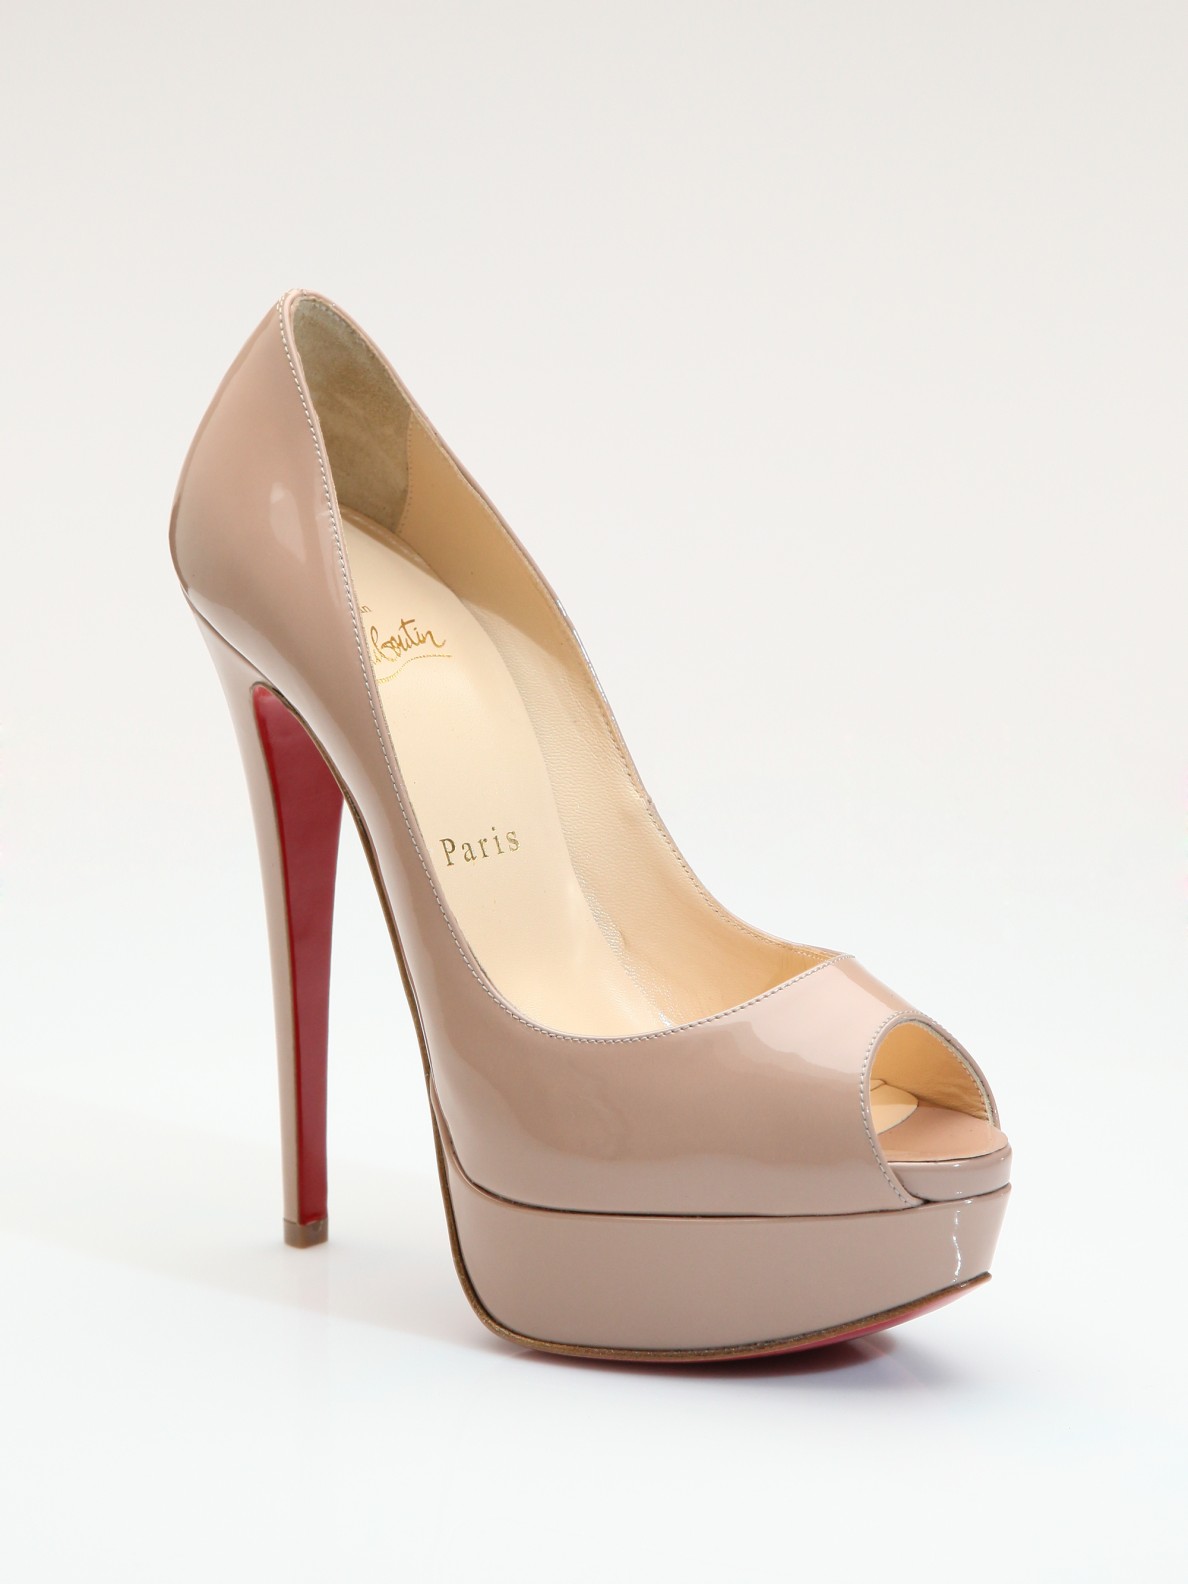 christian louboutin mens trainers - Christian louboutin Lady Peep Toe Patent Leather Pumps in Beige ...